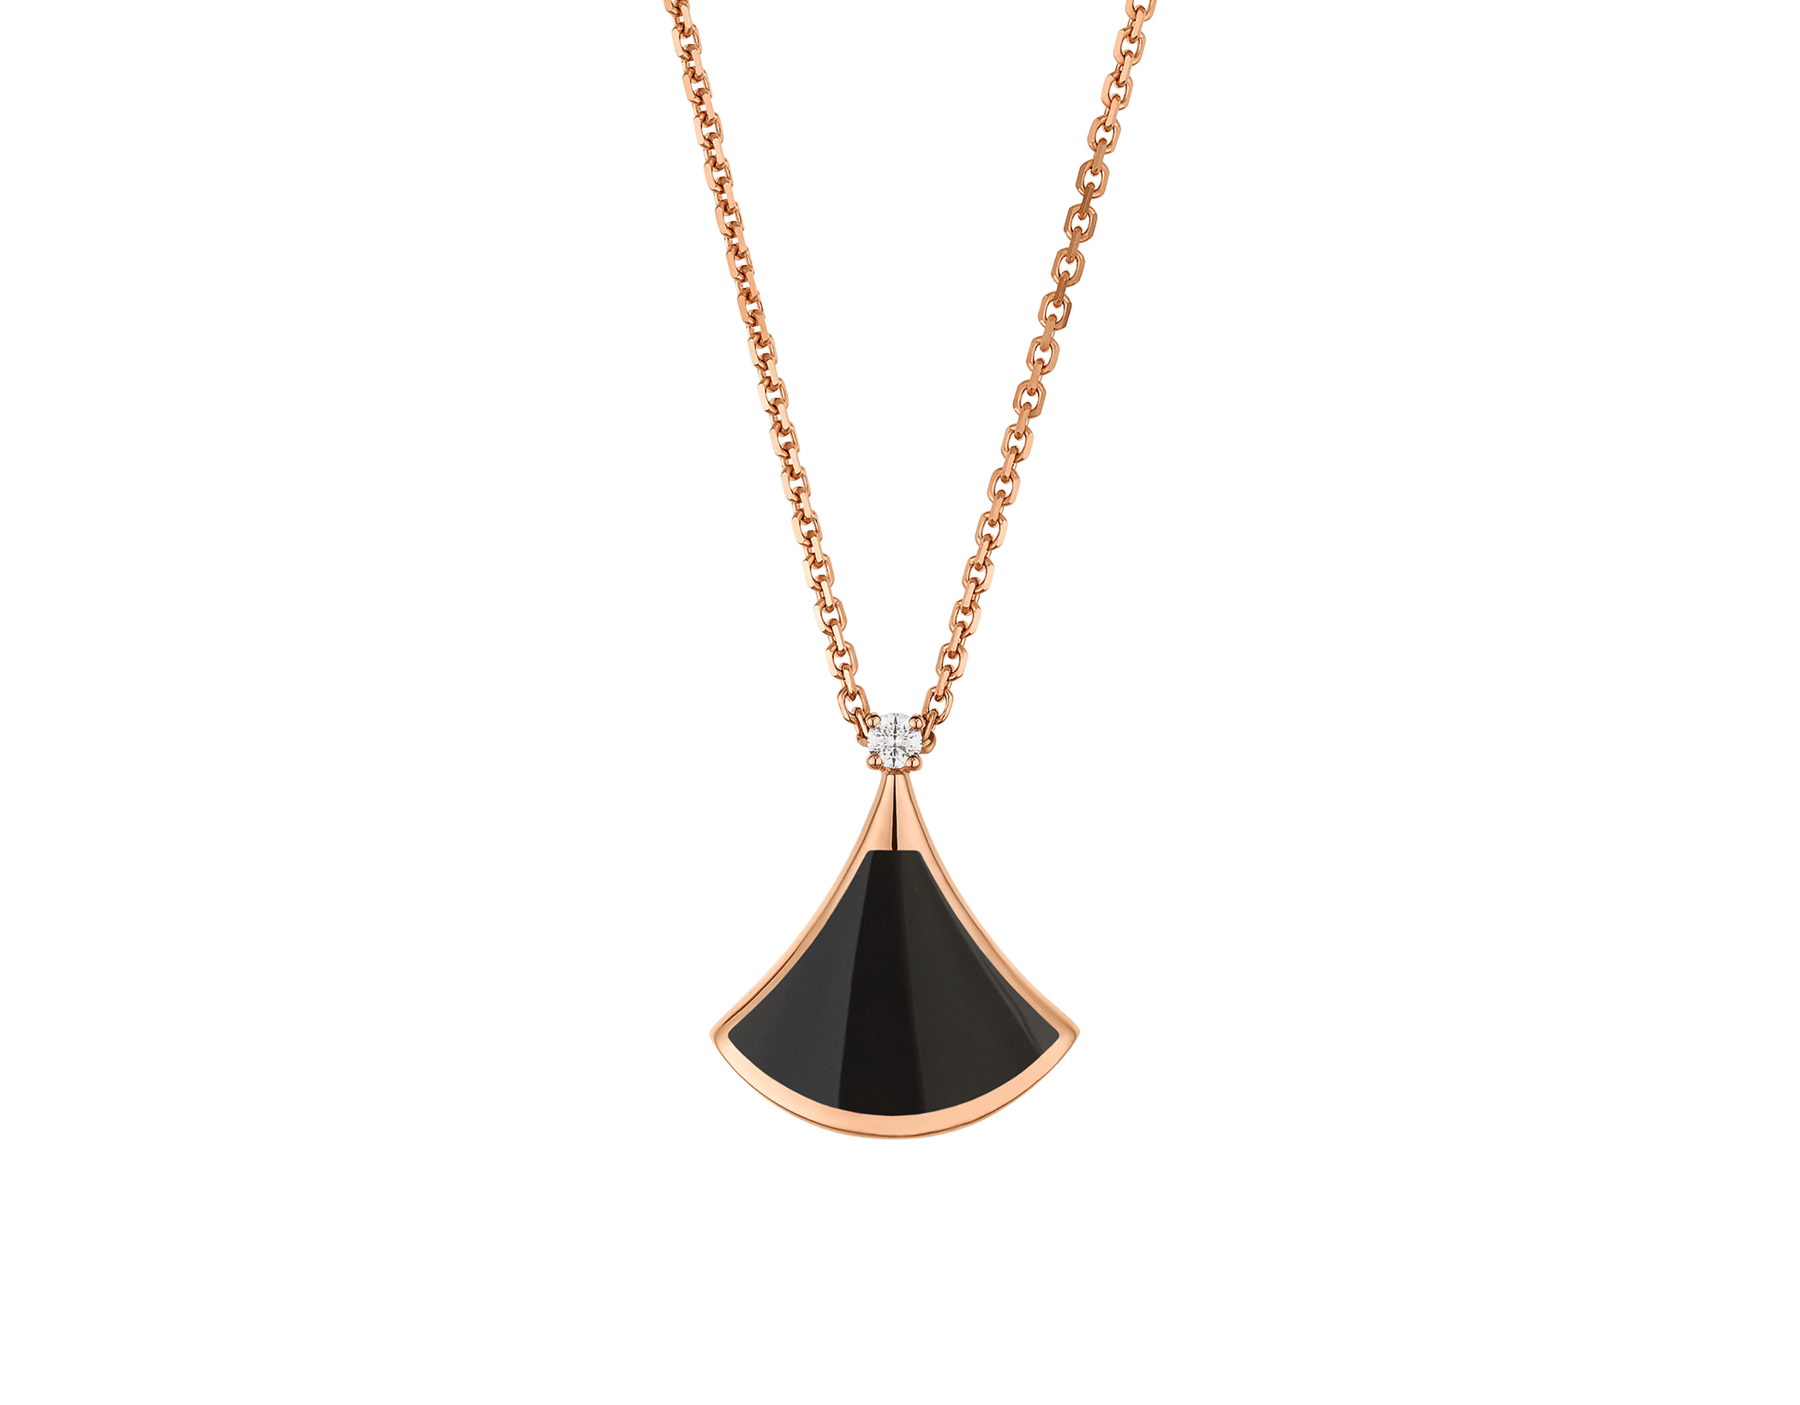 Rose Gold, Mother-of-Pearl and Diamond Divas Dream Pendant-Necklace and  Pair of Earrings, Bulgari by Bulgari (Co.) on artnet